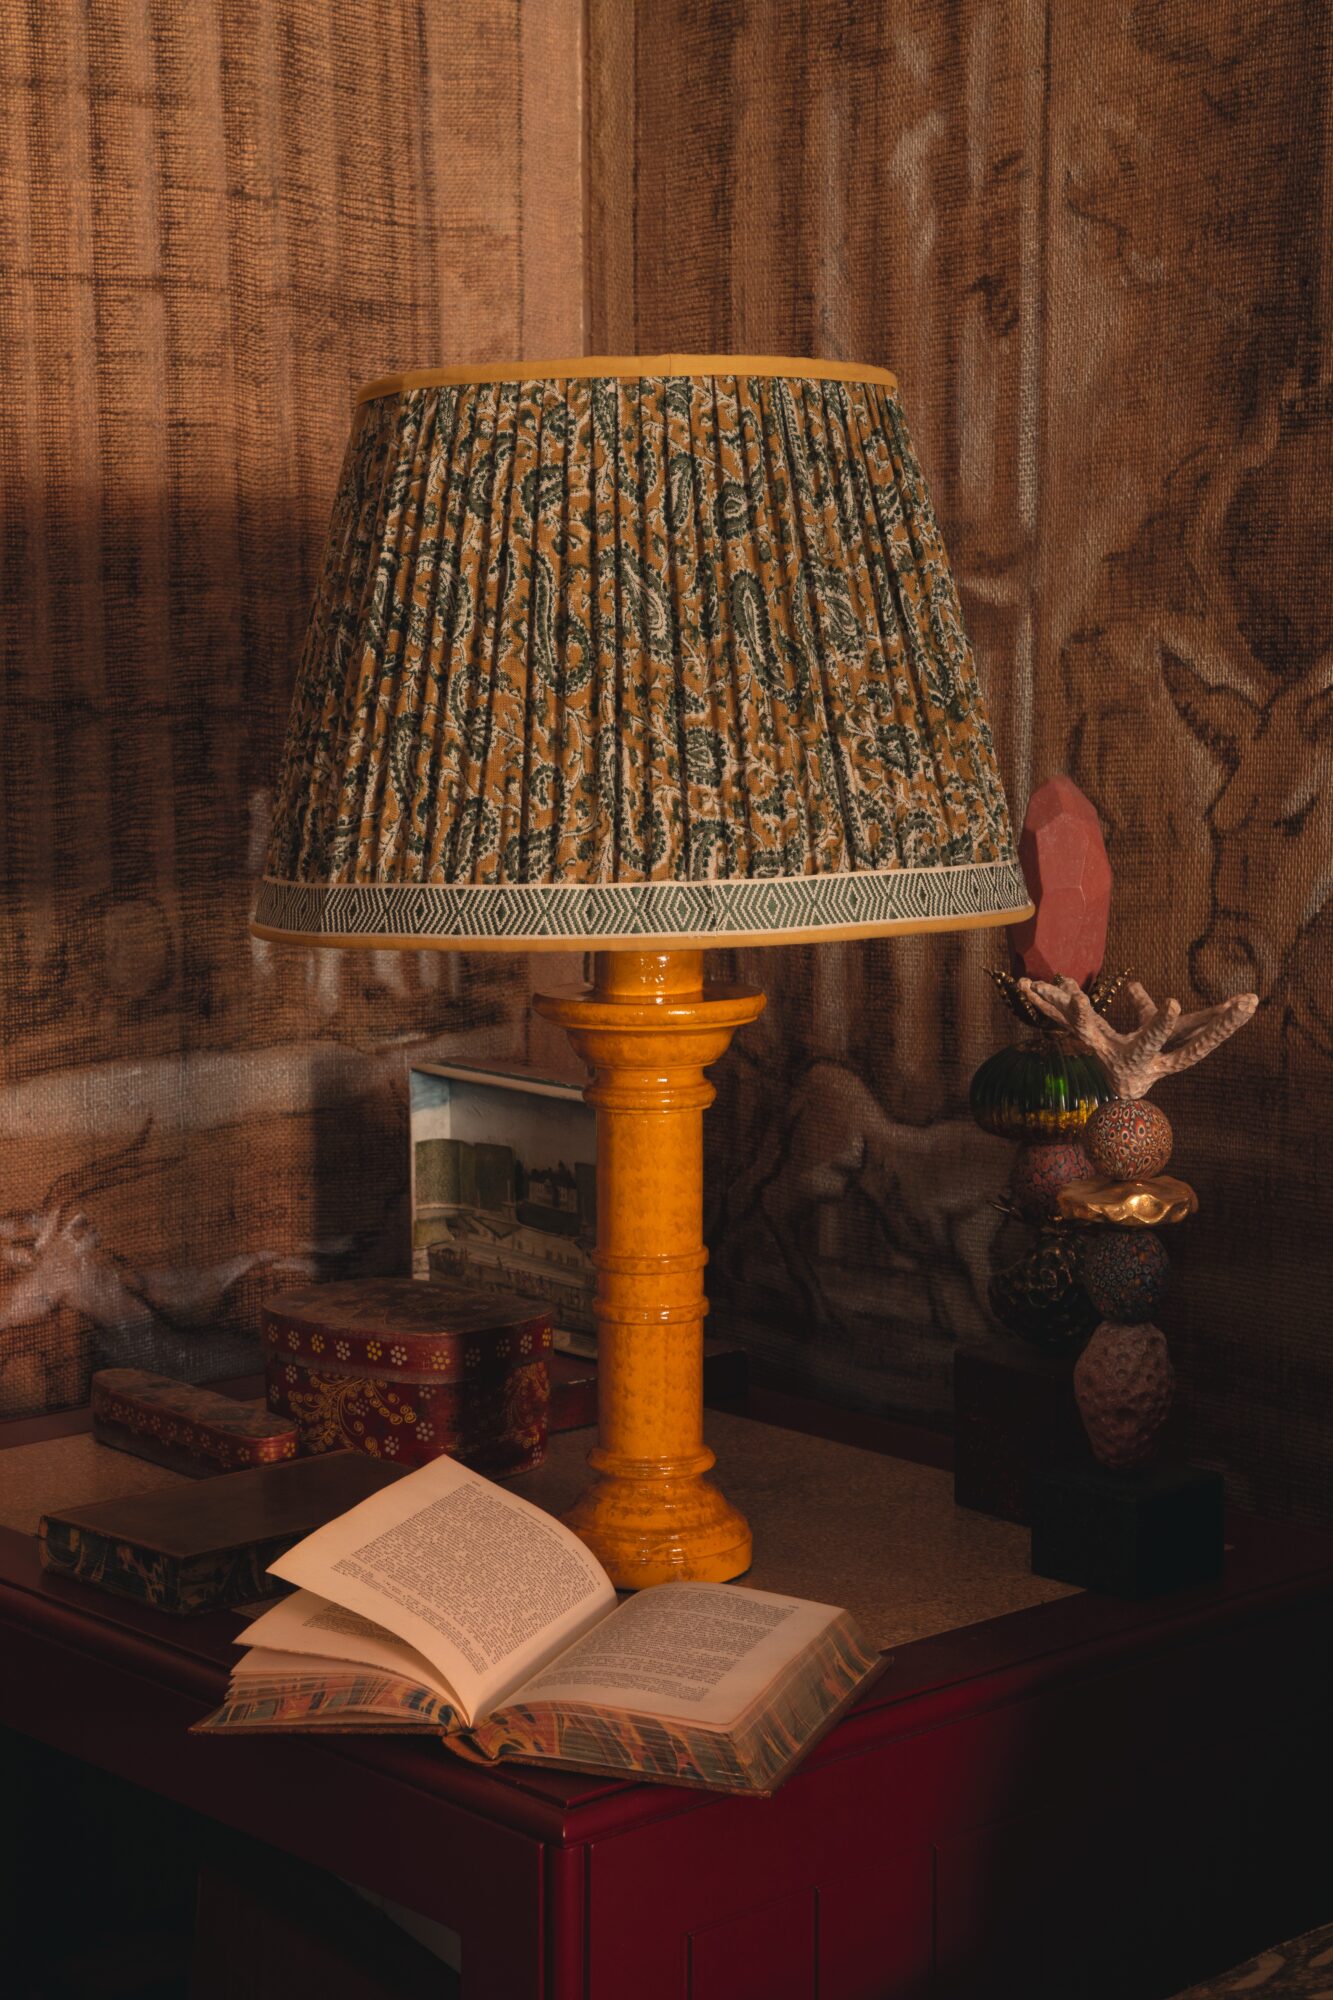 Oka x Cabana Lamp with pleated lampshade sitting on a table next to an open book